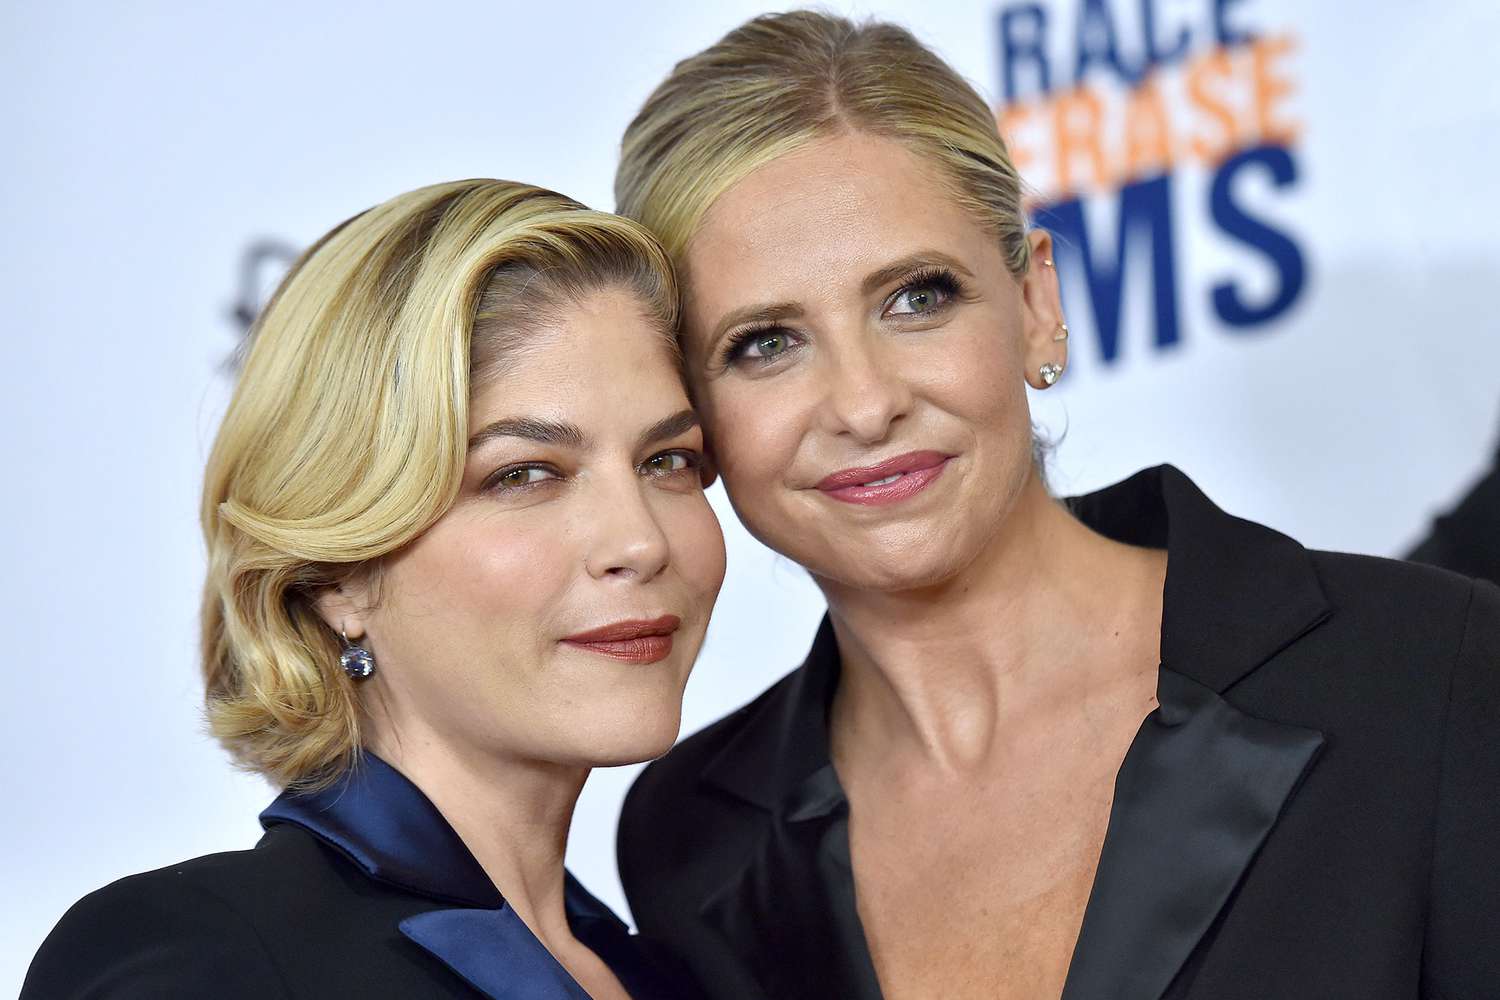 Selma Blair and Sarah Michelle Gellar attend the 26th Annual Race to Erase MS Gala at The Beverly Hilton Hotel on May 10, 2019 in Beverly Hills, California.